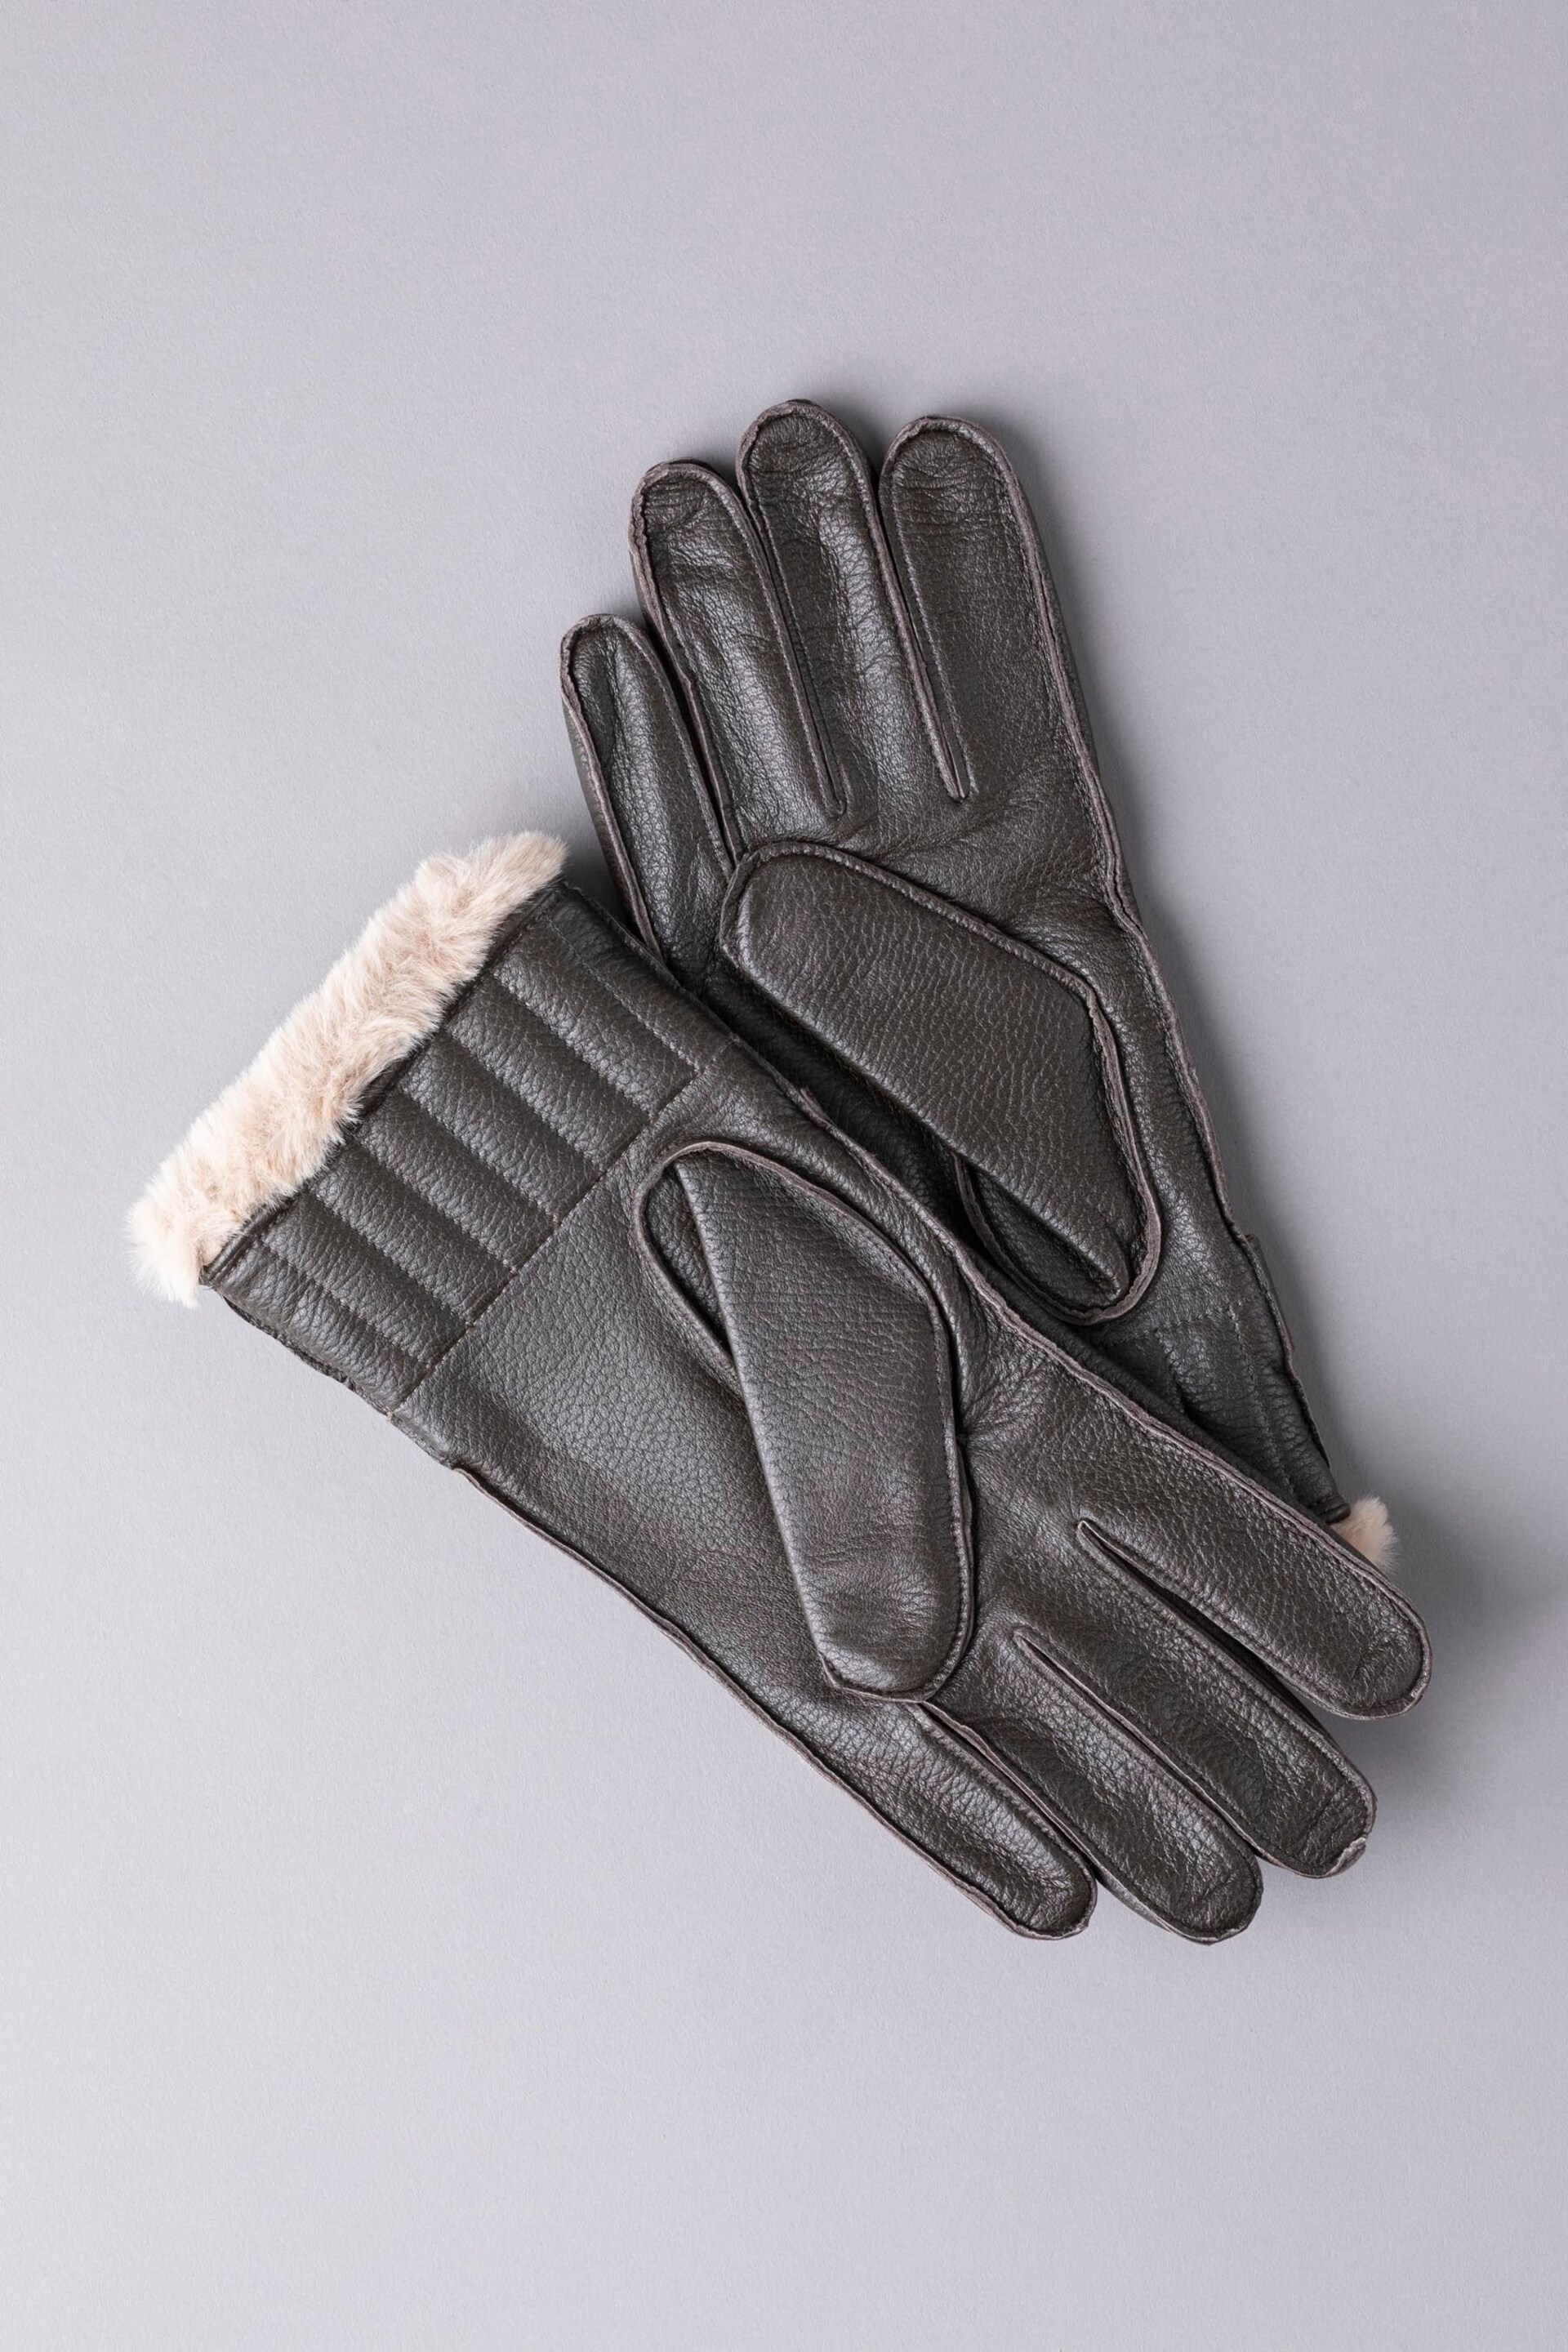 Lakeland Leather Brown Milne Leather Gloves - Image 2 of 3